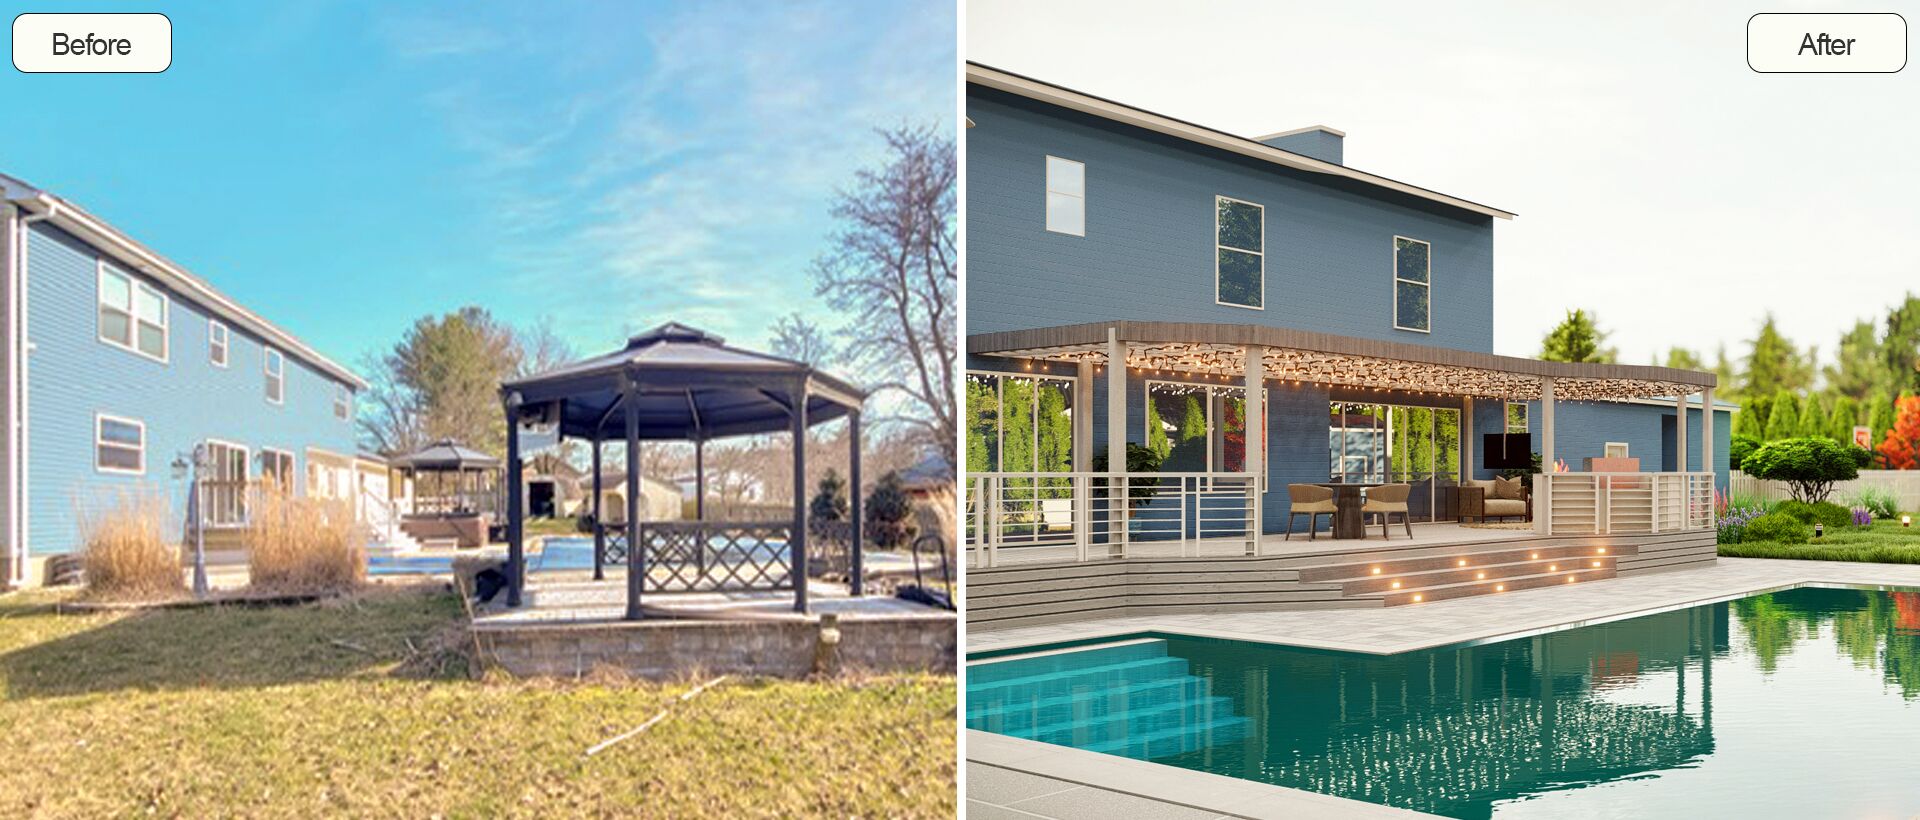 Before and after views of a backyard exterior transformation by Homely Design, from a simple lawn to a stylish patio with a pool.